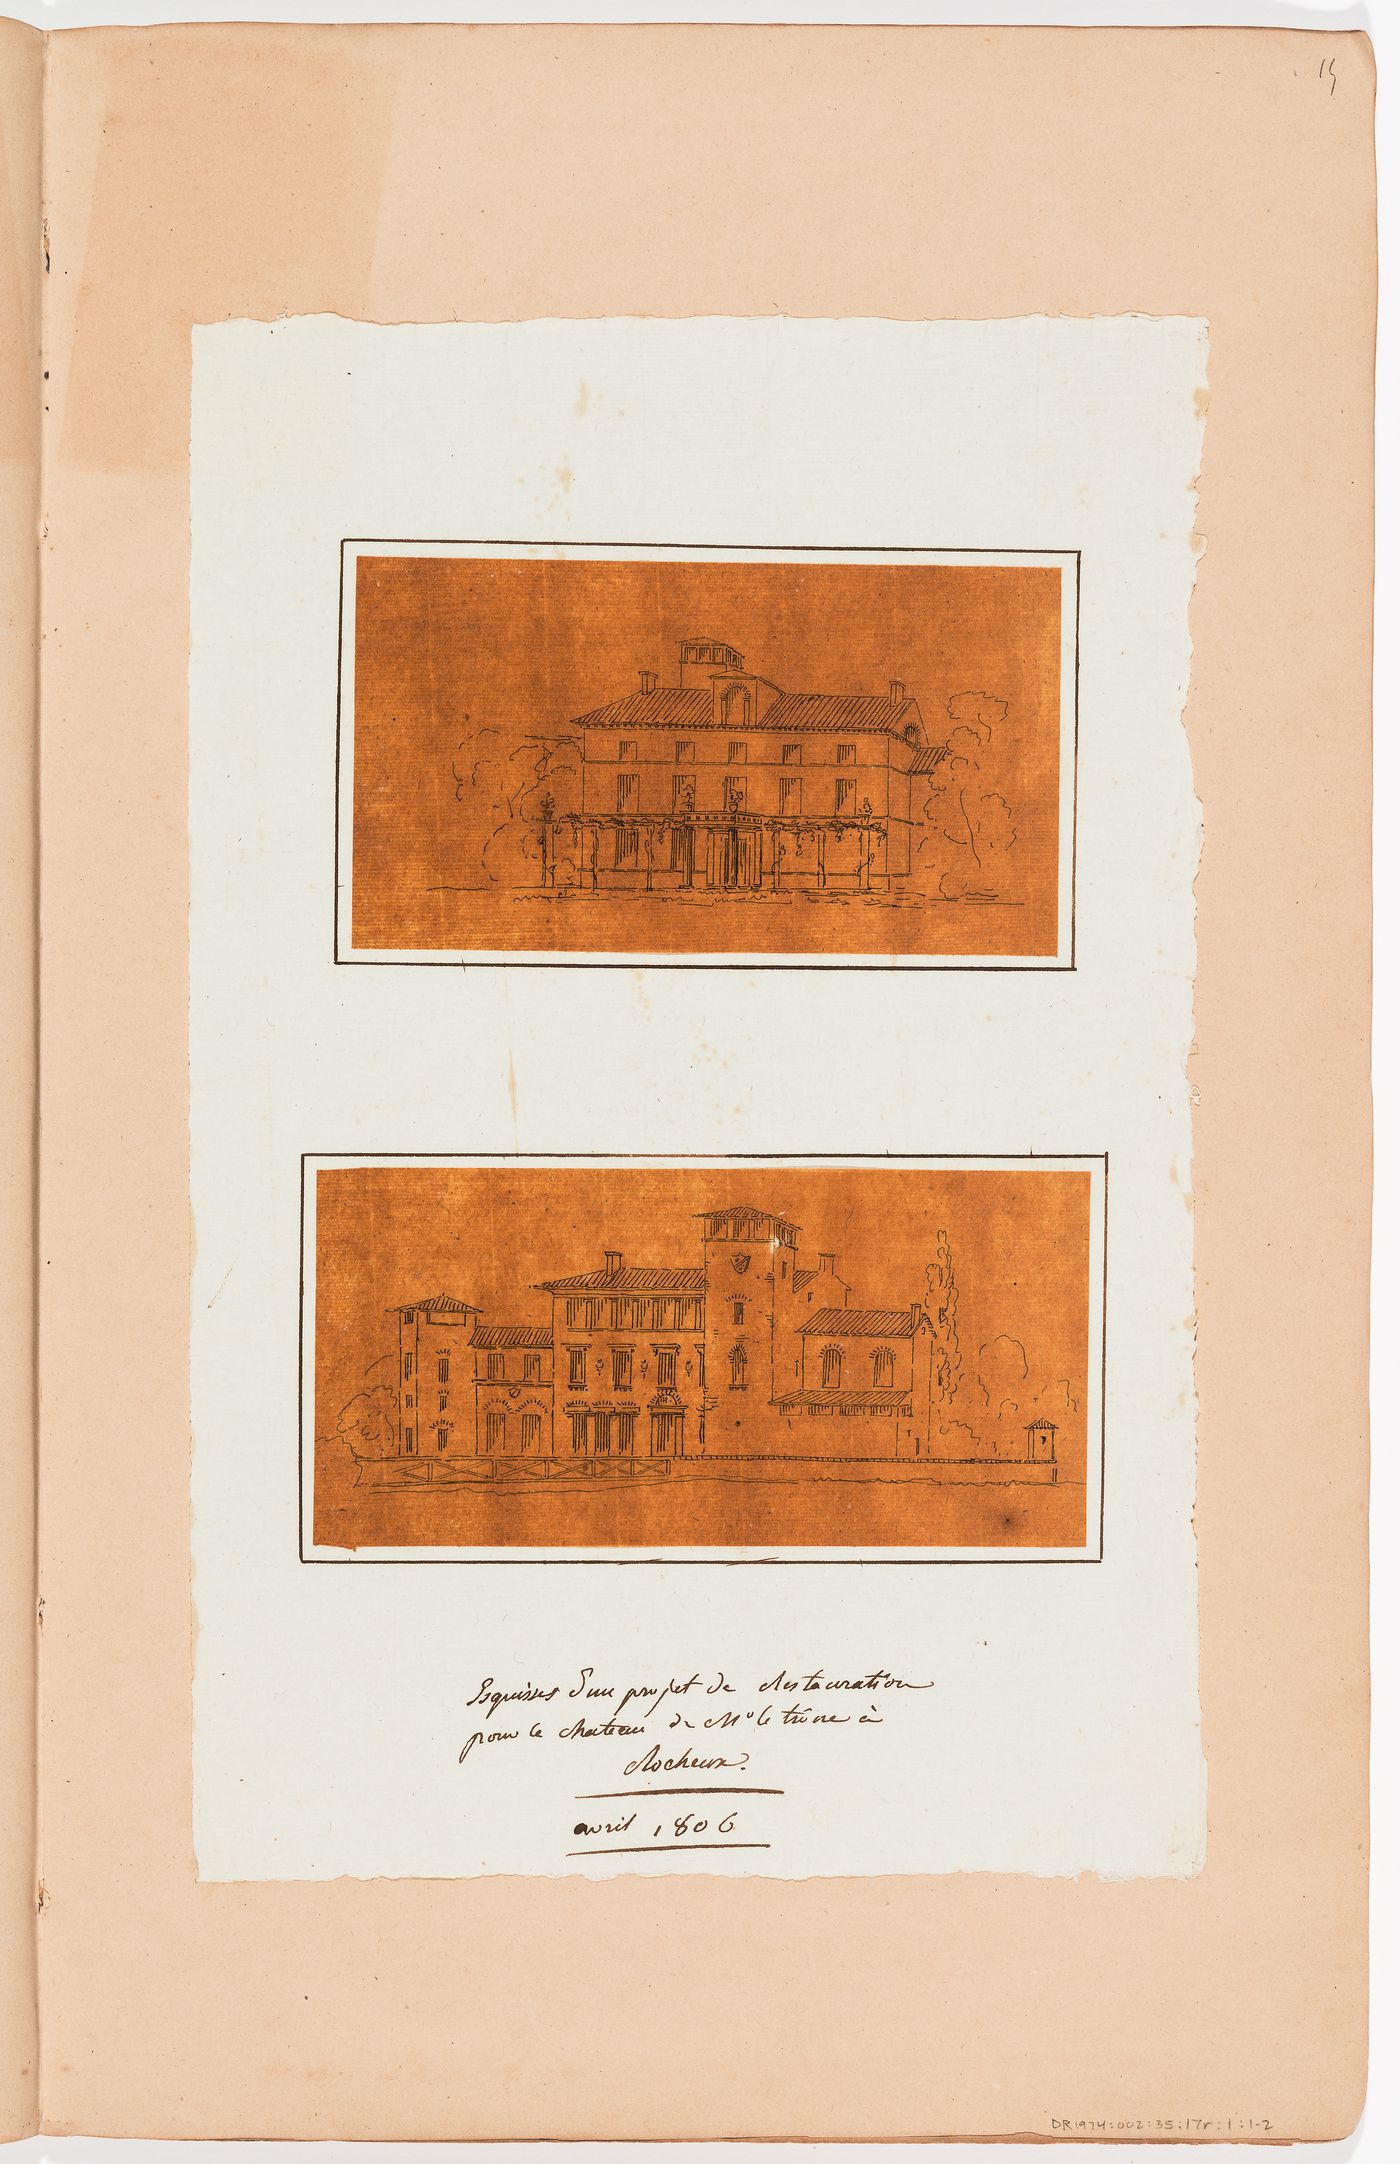 Conceptual drawing for the restoration of a château for M. le Trône; verso: Sketch elevation and plans for a country house